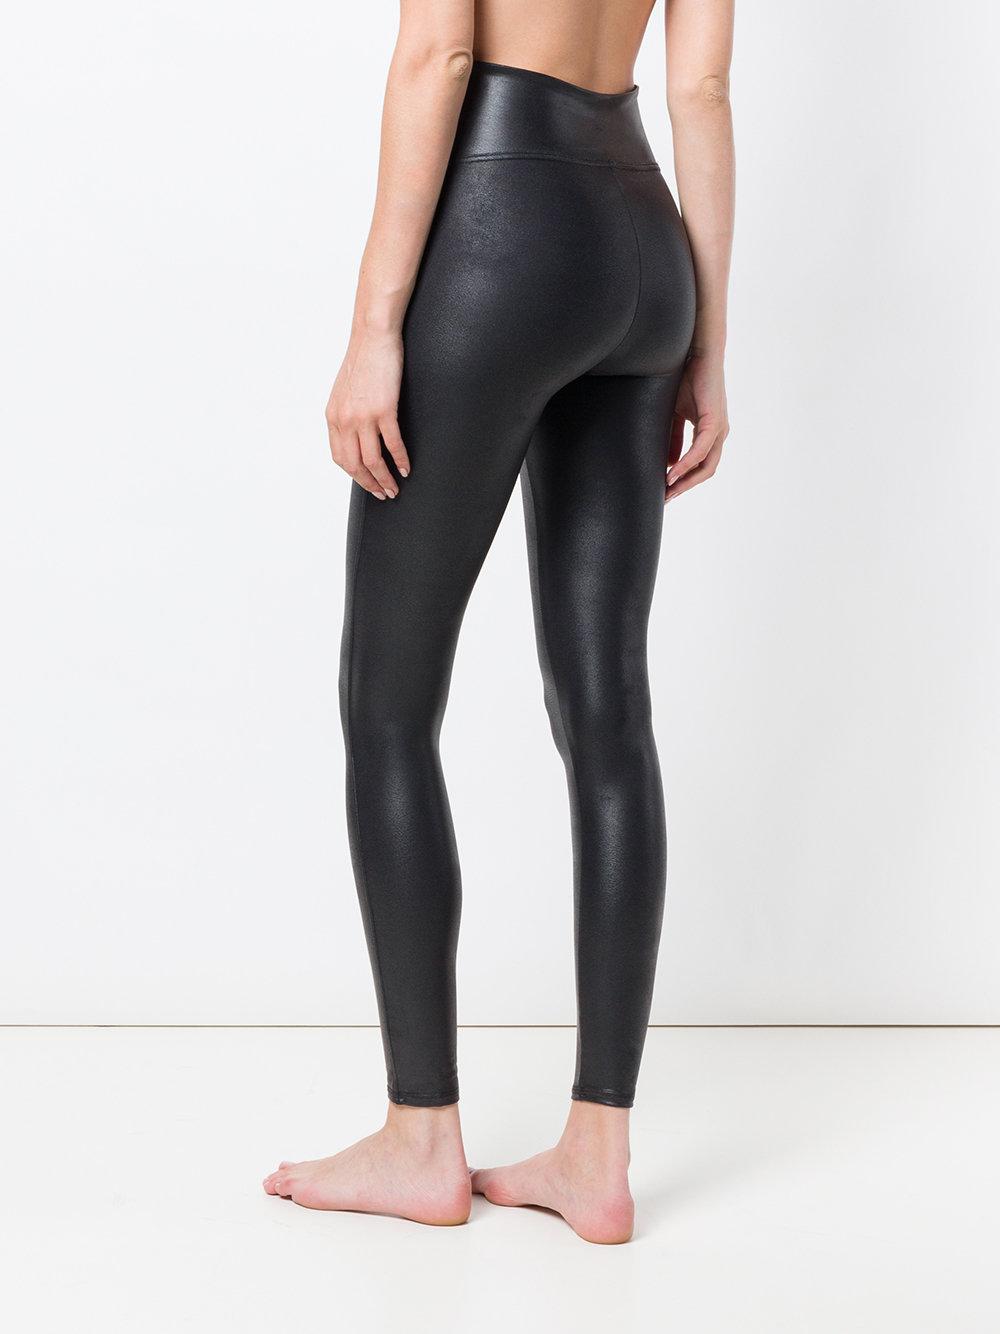 Garage Shiny Leggings Canada Goose  International Society of Precision  Agriculture